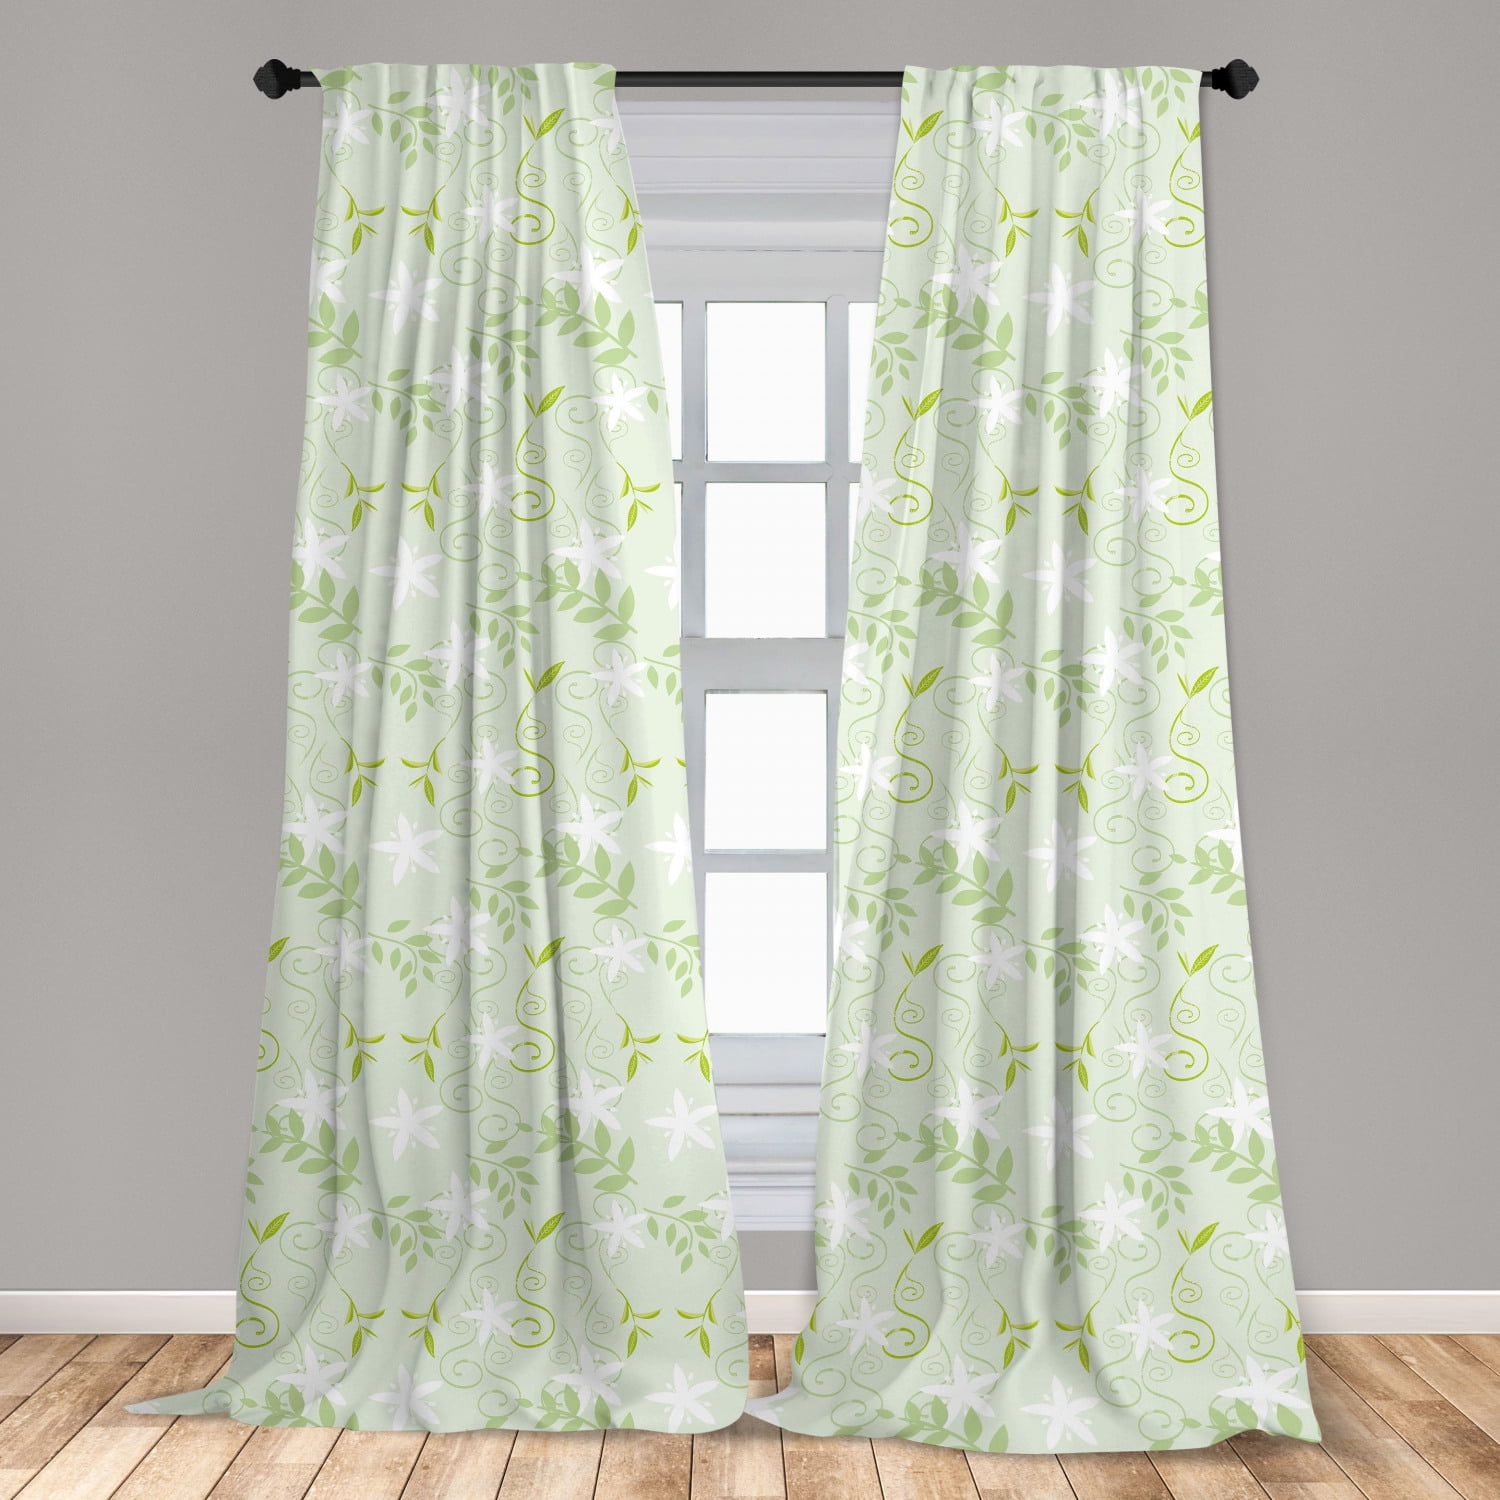 Flower Branch Patterned Window Curtains Blackout Drapes 2 Panels Home Curtains 